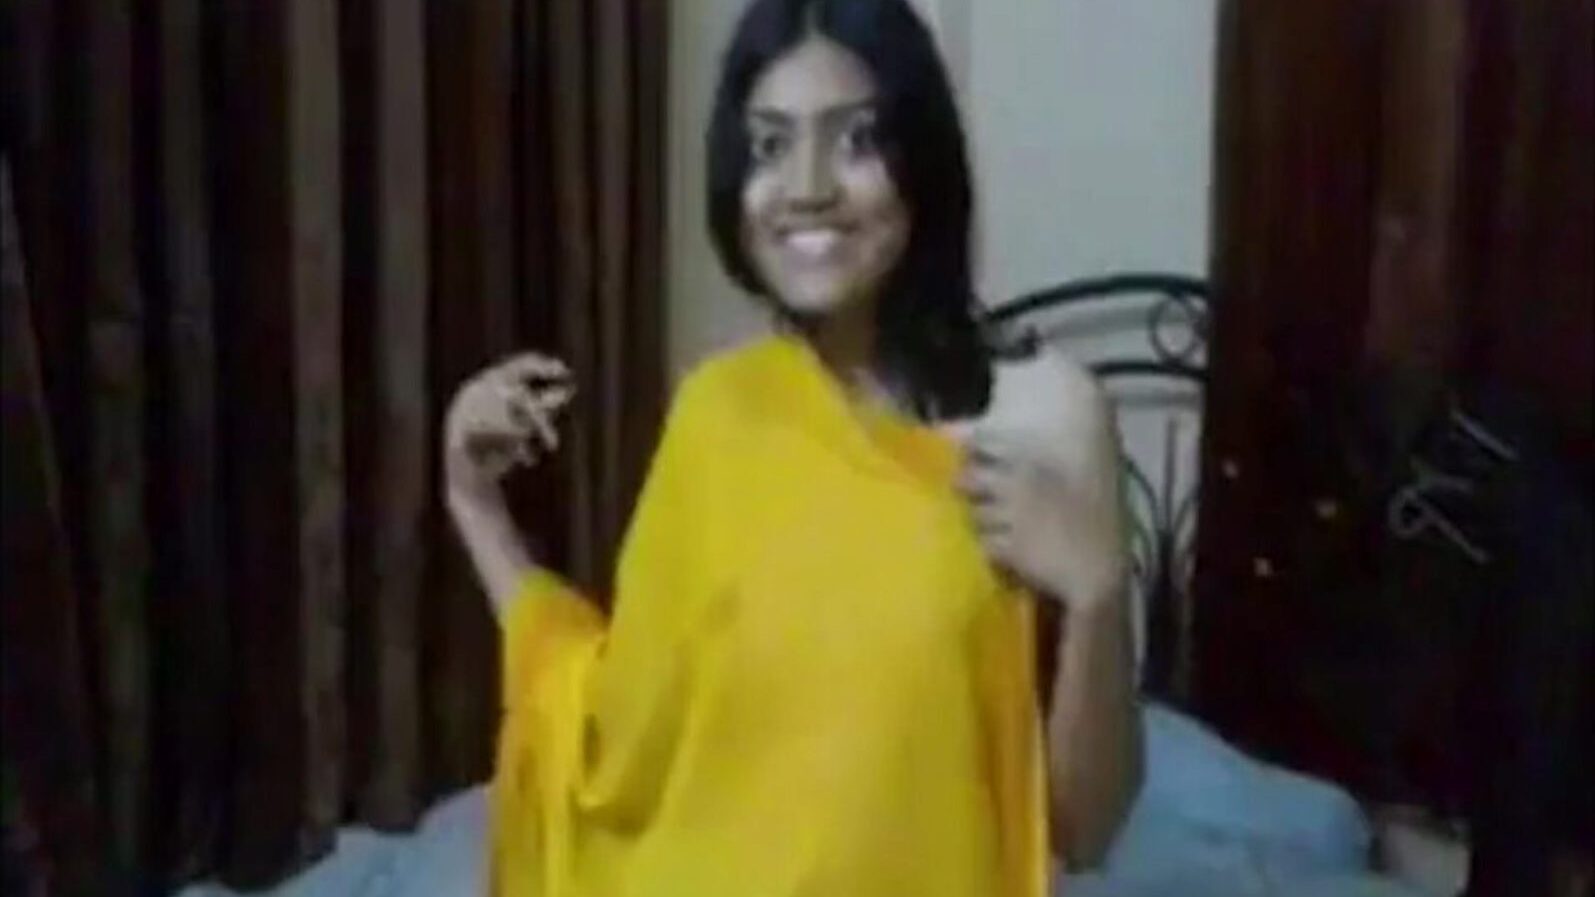 Indian College Girl Fuck by Stepbrother, Porn 0c: xHamster Watch Indian College Girl Fuck by Stepbrother episode on xHamster, the huge HD fuckfest tube web site with tons of free-for-all Asian Fuck Online & Blowjob porno movie scenes